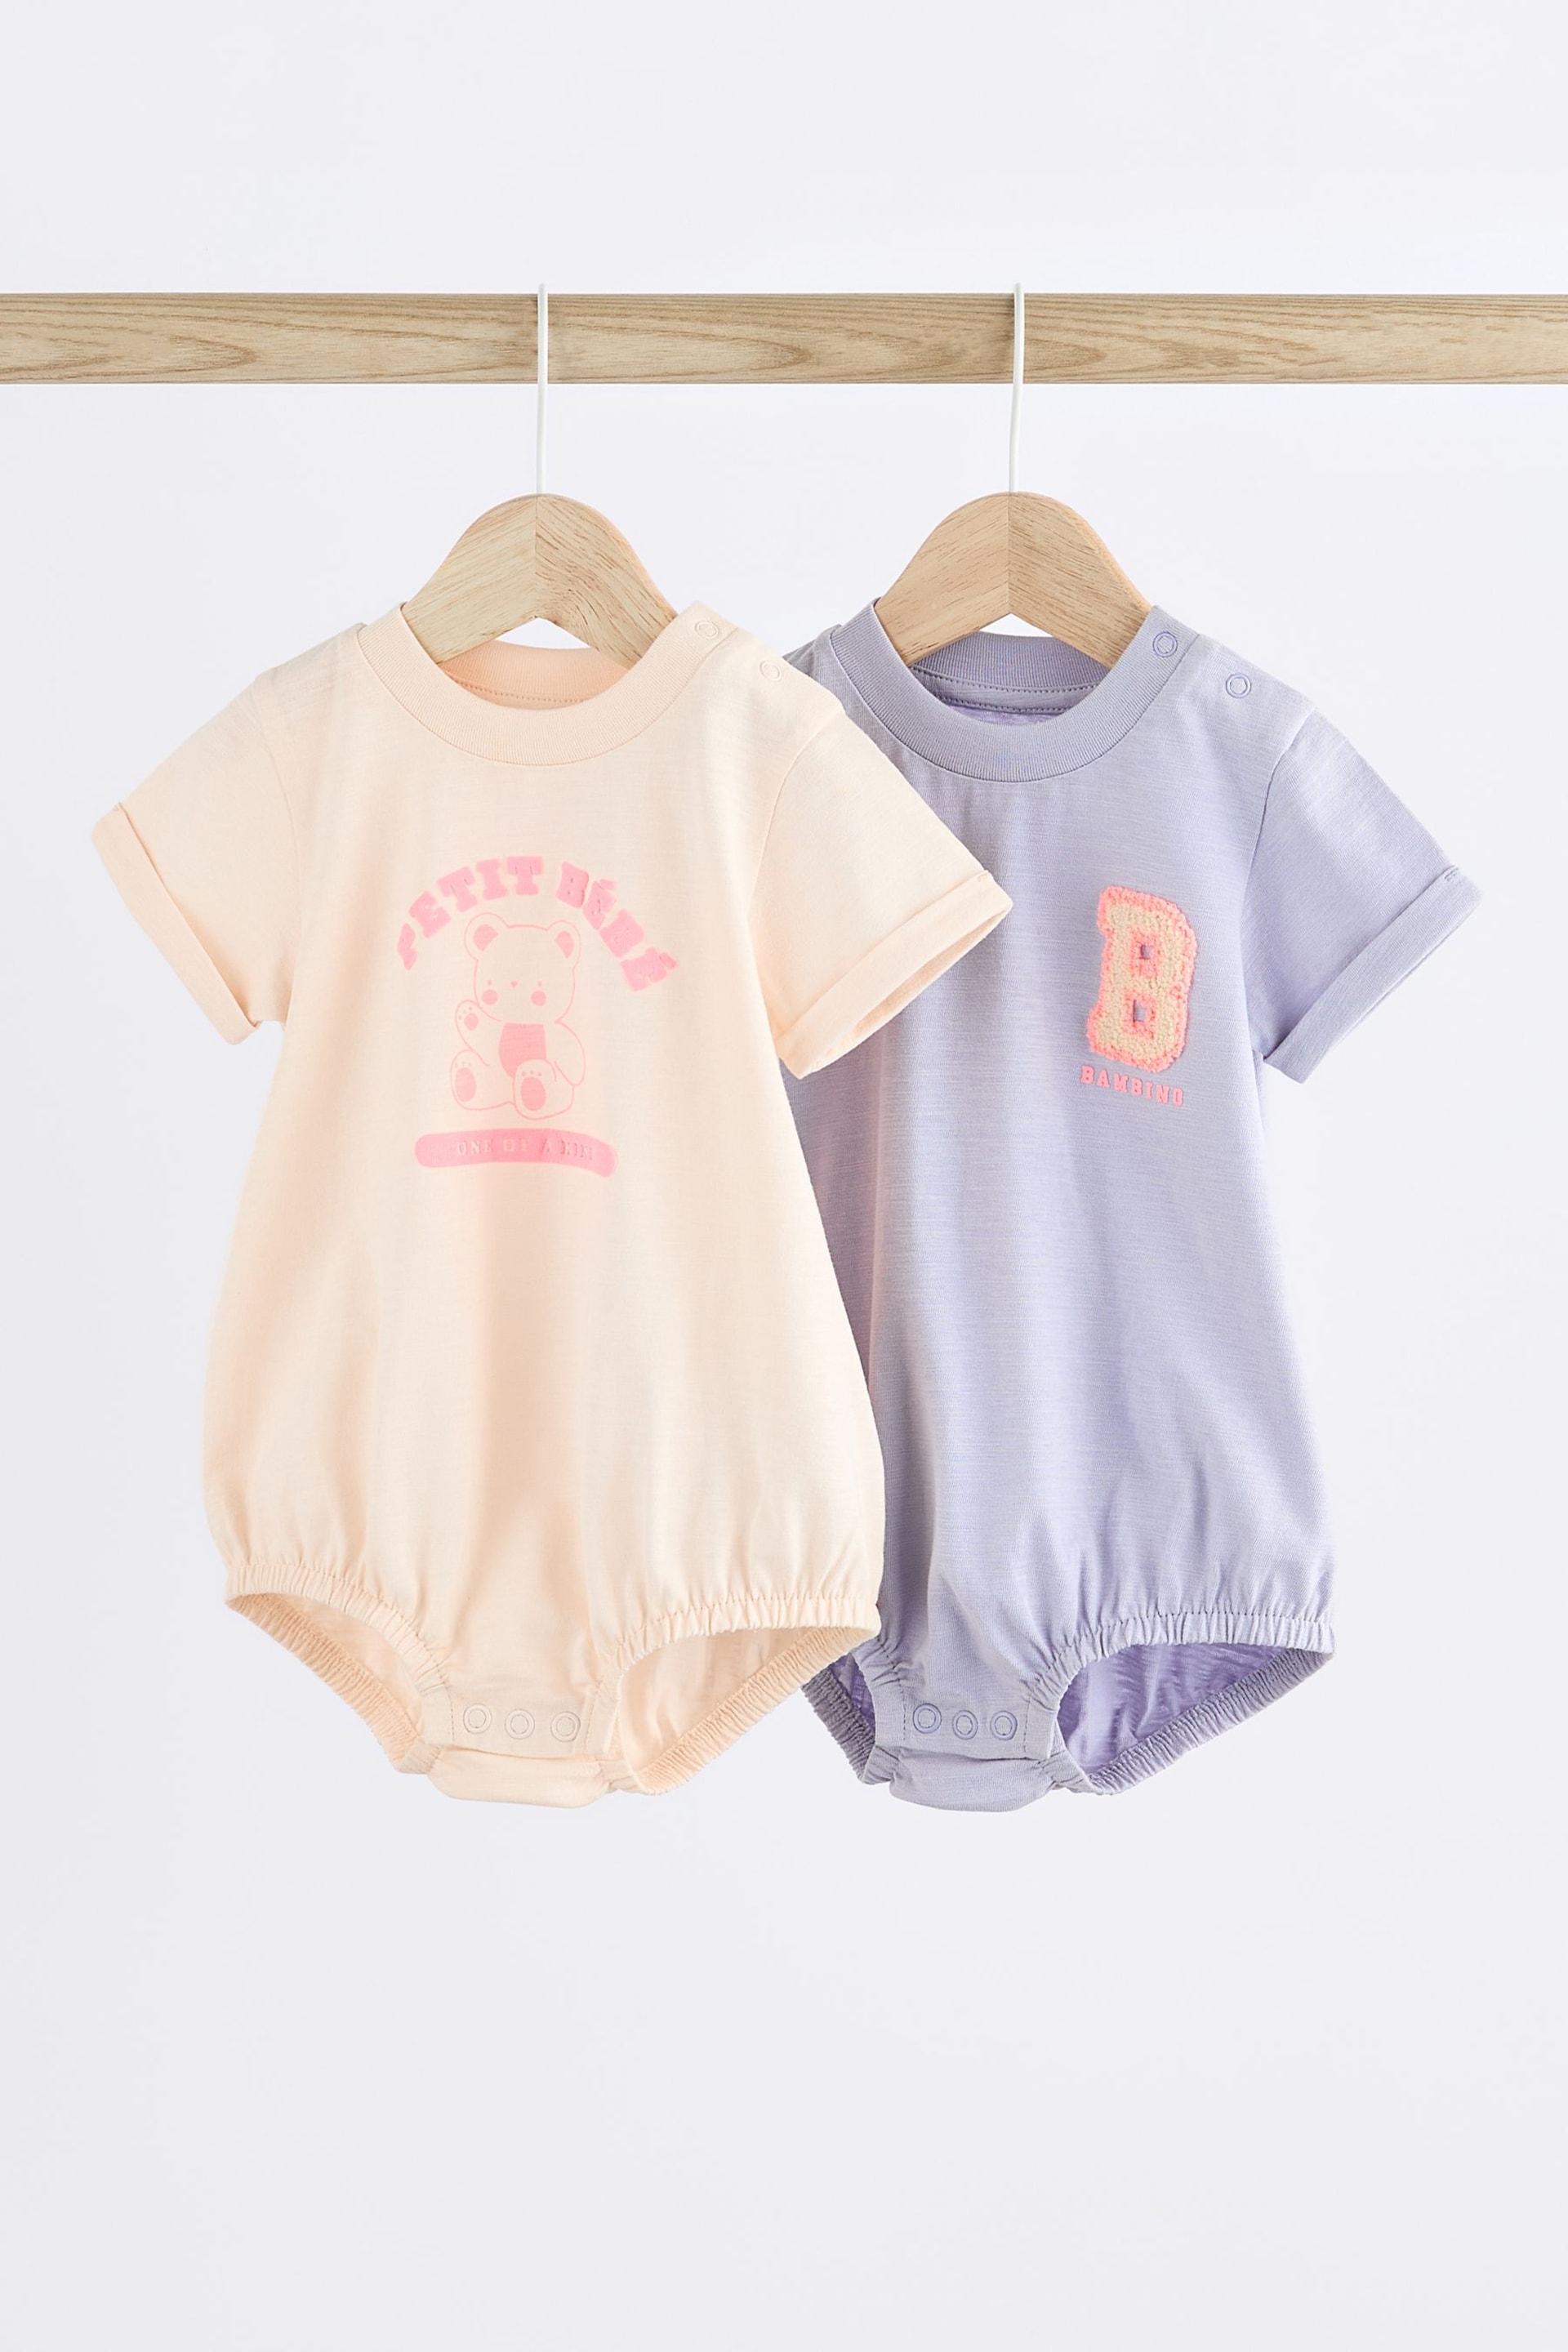 Lilac Purple/White Varsity Bunny Baby Rompers 2 Pack - Image 1 of 12